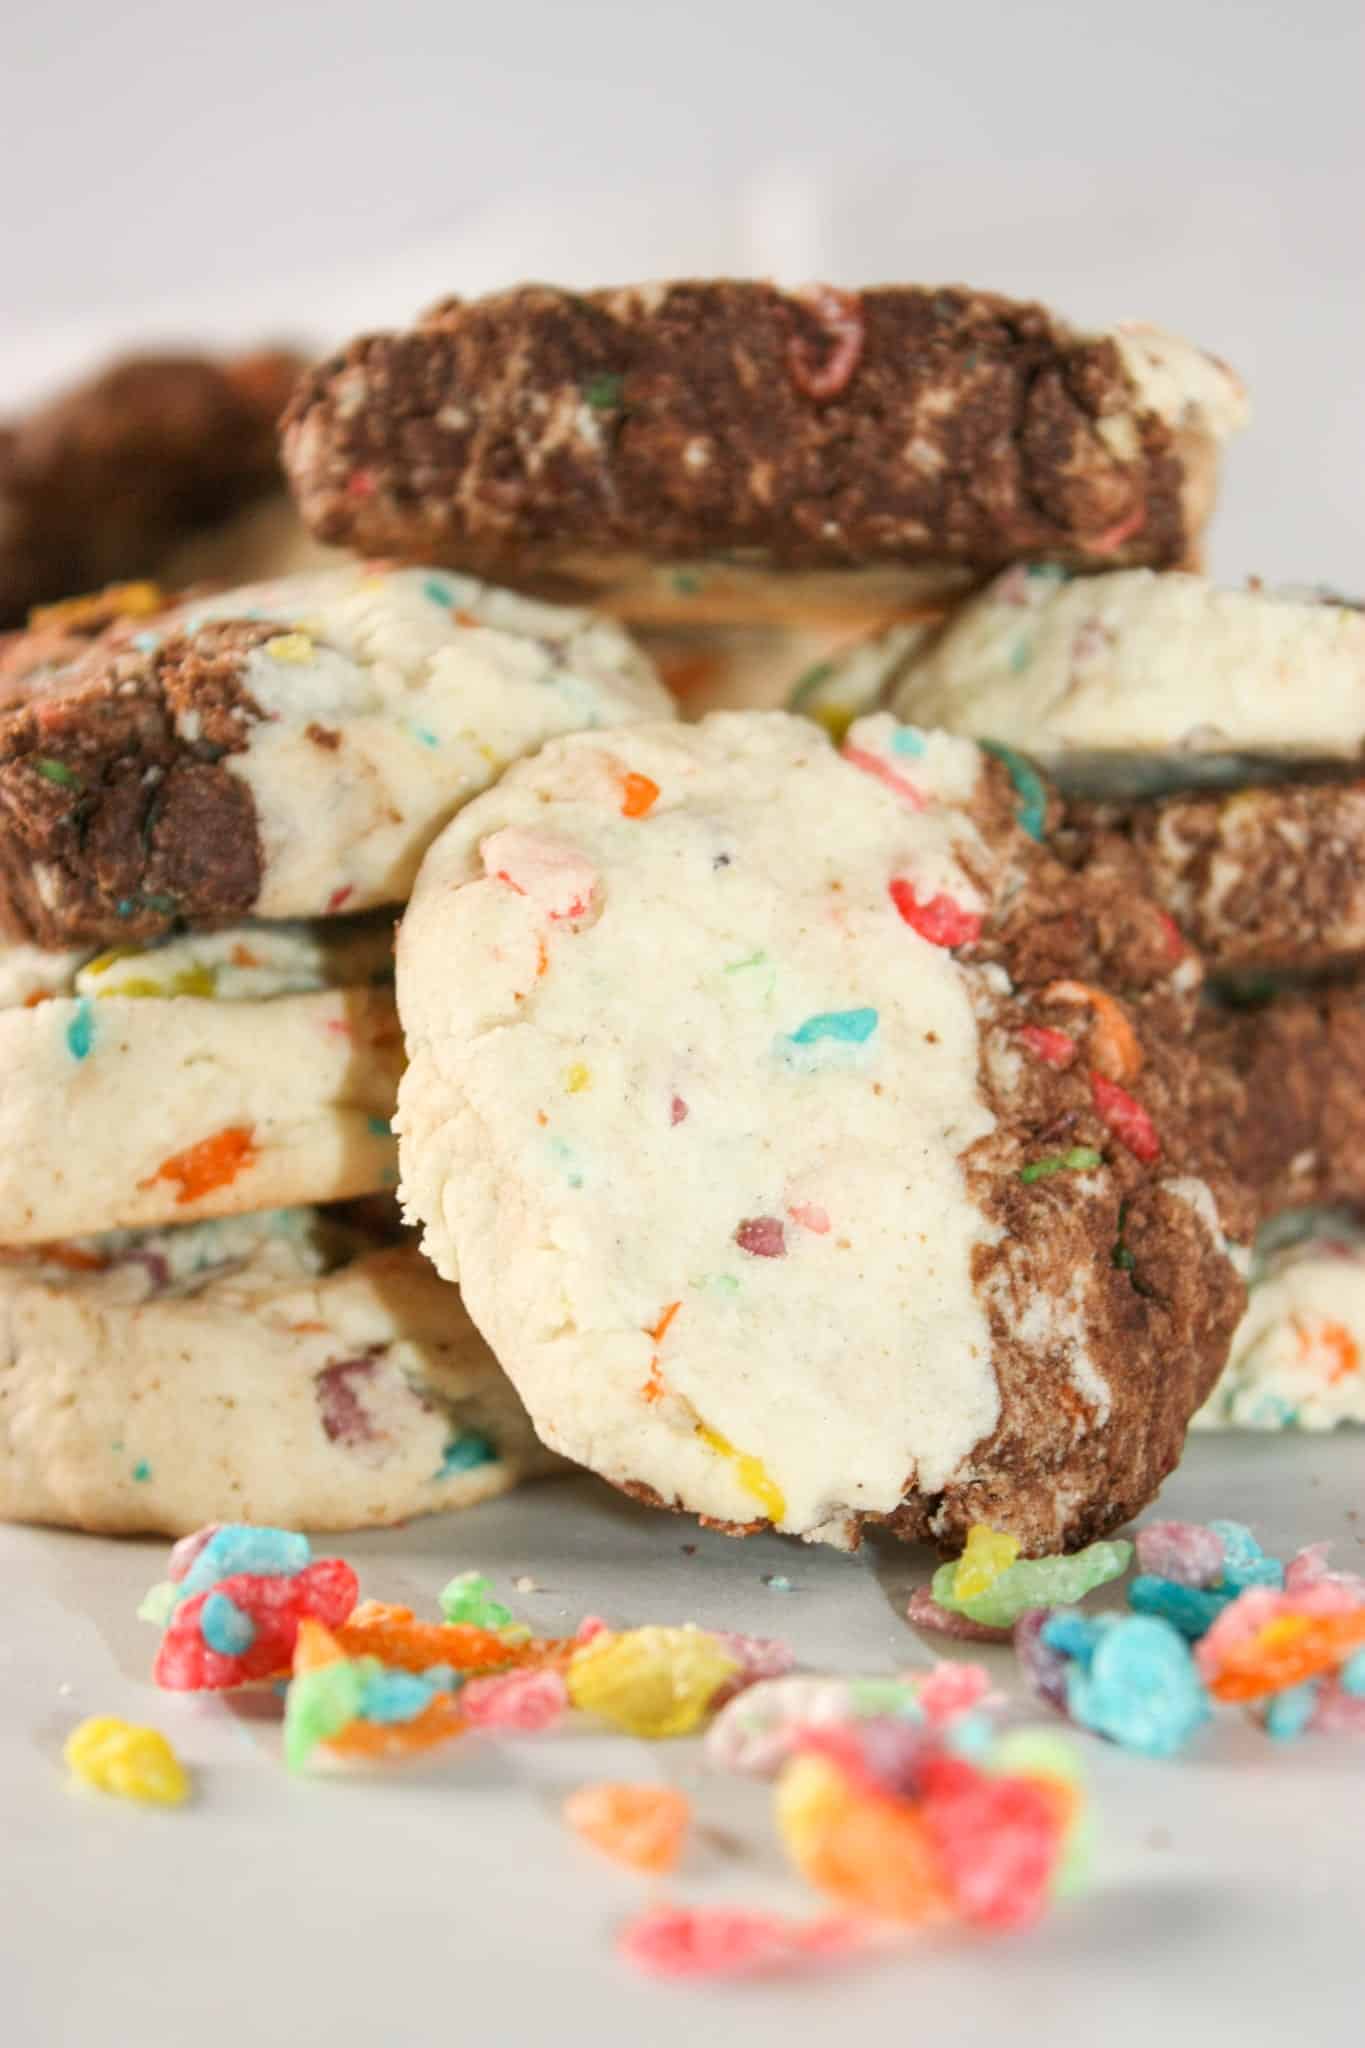 Fruity Pebbles Cookies are a nice colourful snack.  This easy, gluten free recipe will be sure to please the palates of both young and old alike!